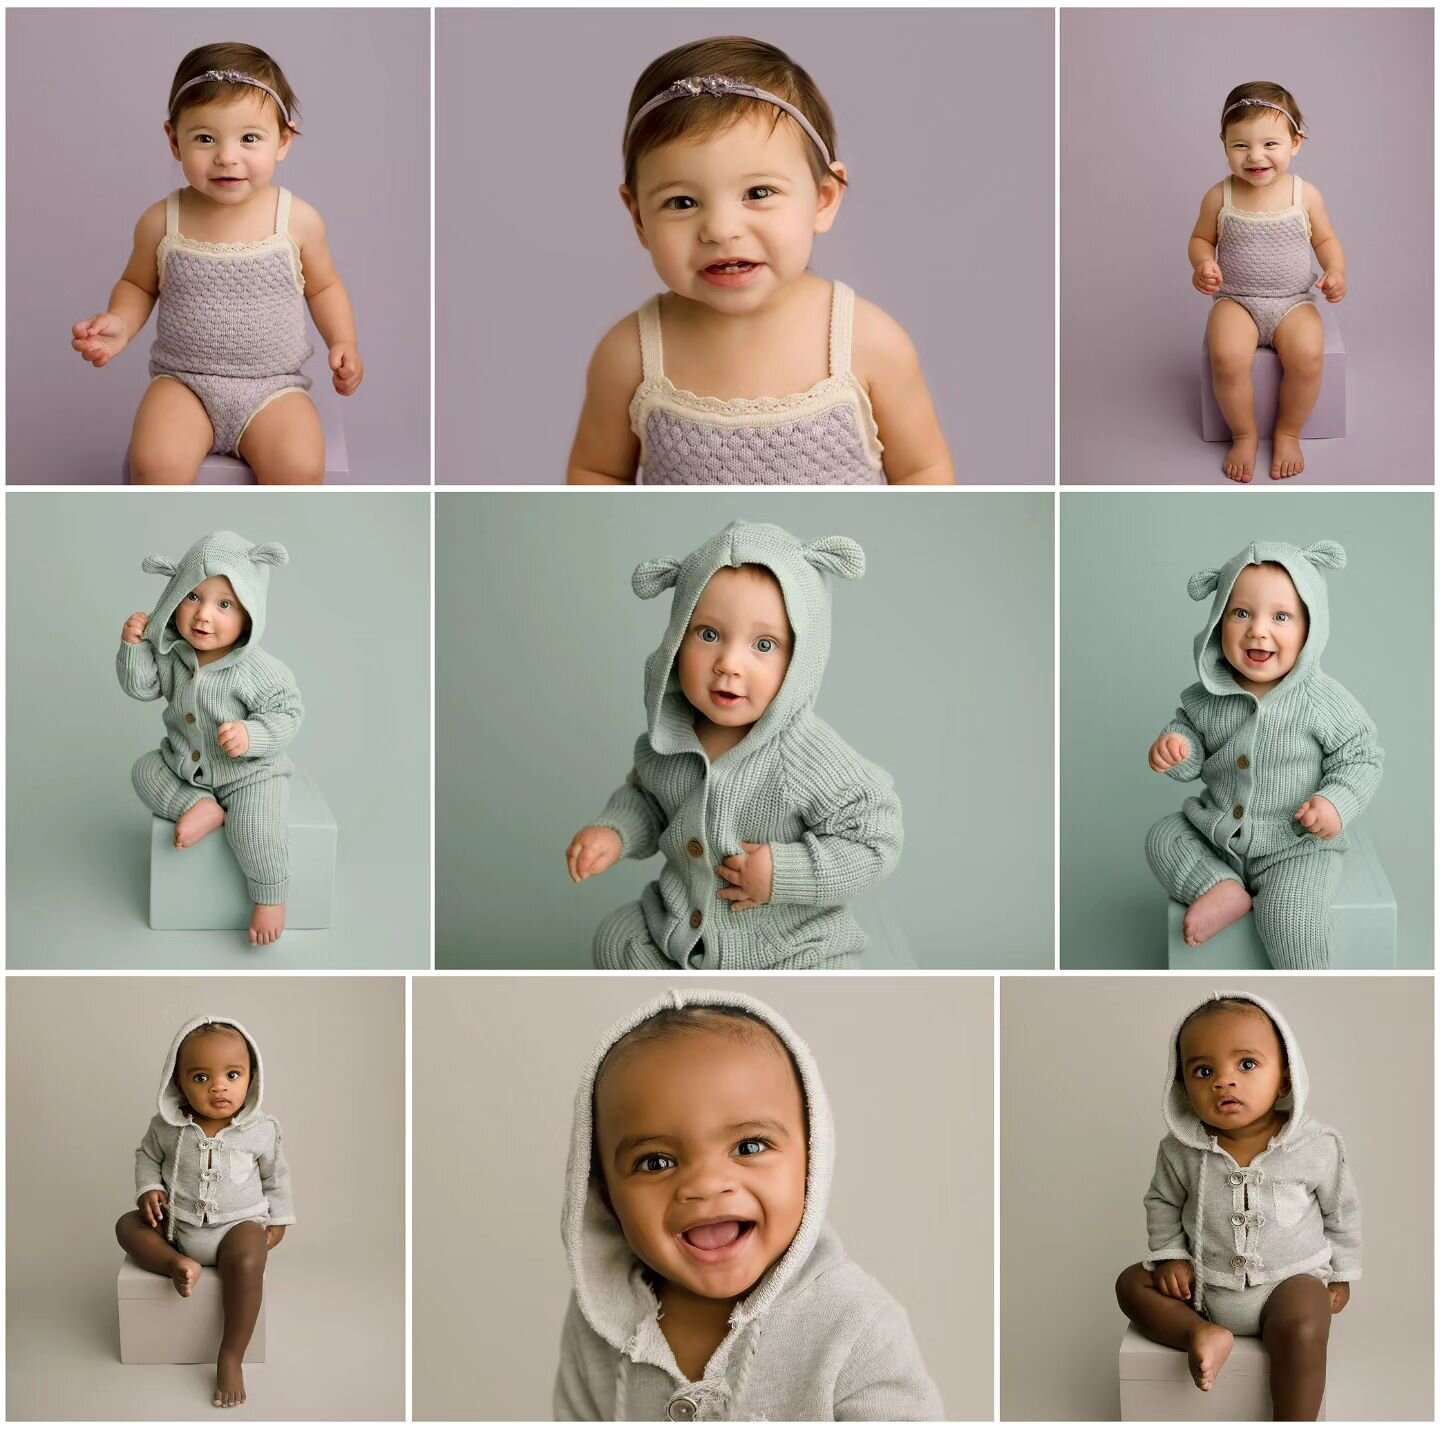 NOW BOOKING Monochrome Minis!! 
✨️Choose one color (grey, light blue, lavender or khaki) and bring your child in for a simple shoot focused on big personality 😊

#genevaillinois #babyphotography #genevailchamber #studiomaternityphotographer #genevai